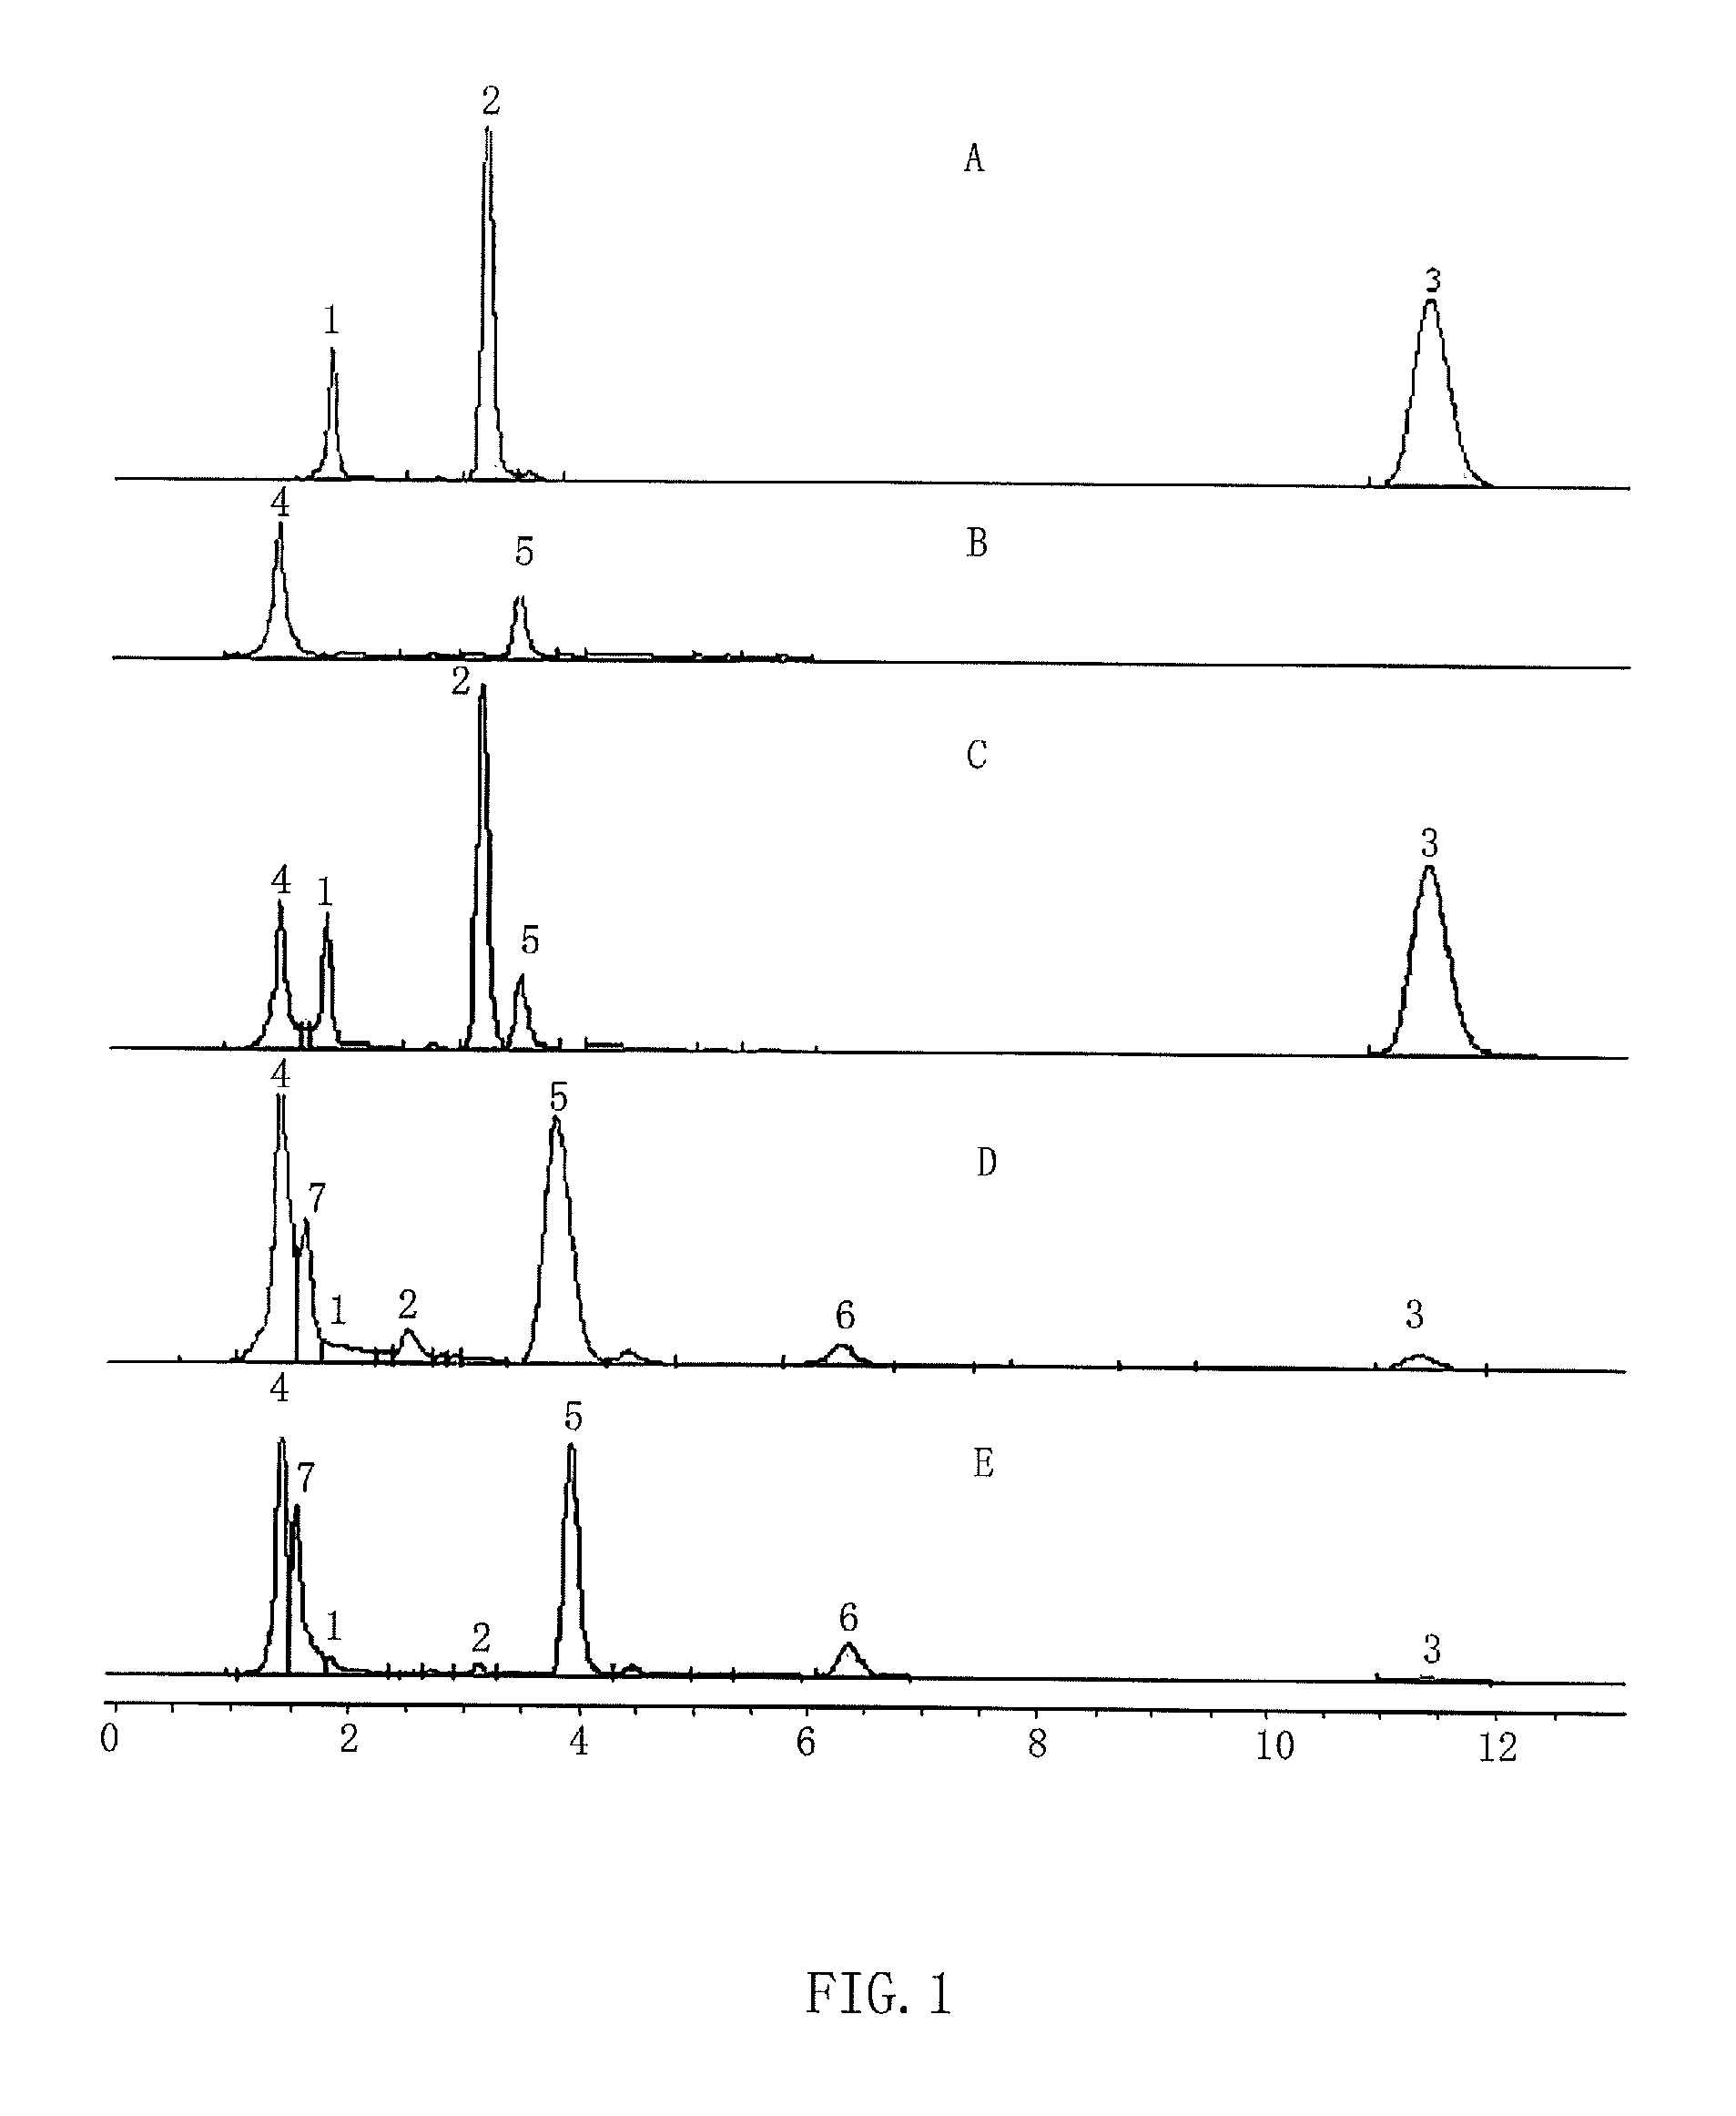 Method of producing xylitol and arabinose at same time from hemicellulose hydrolysates